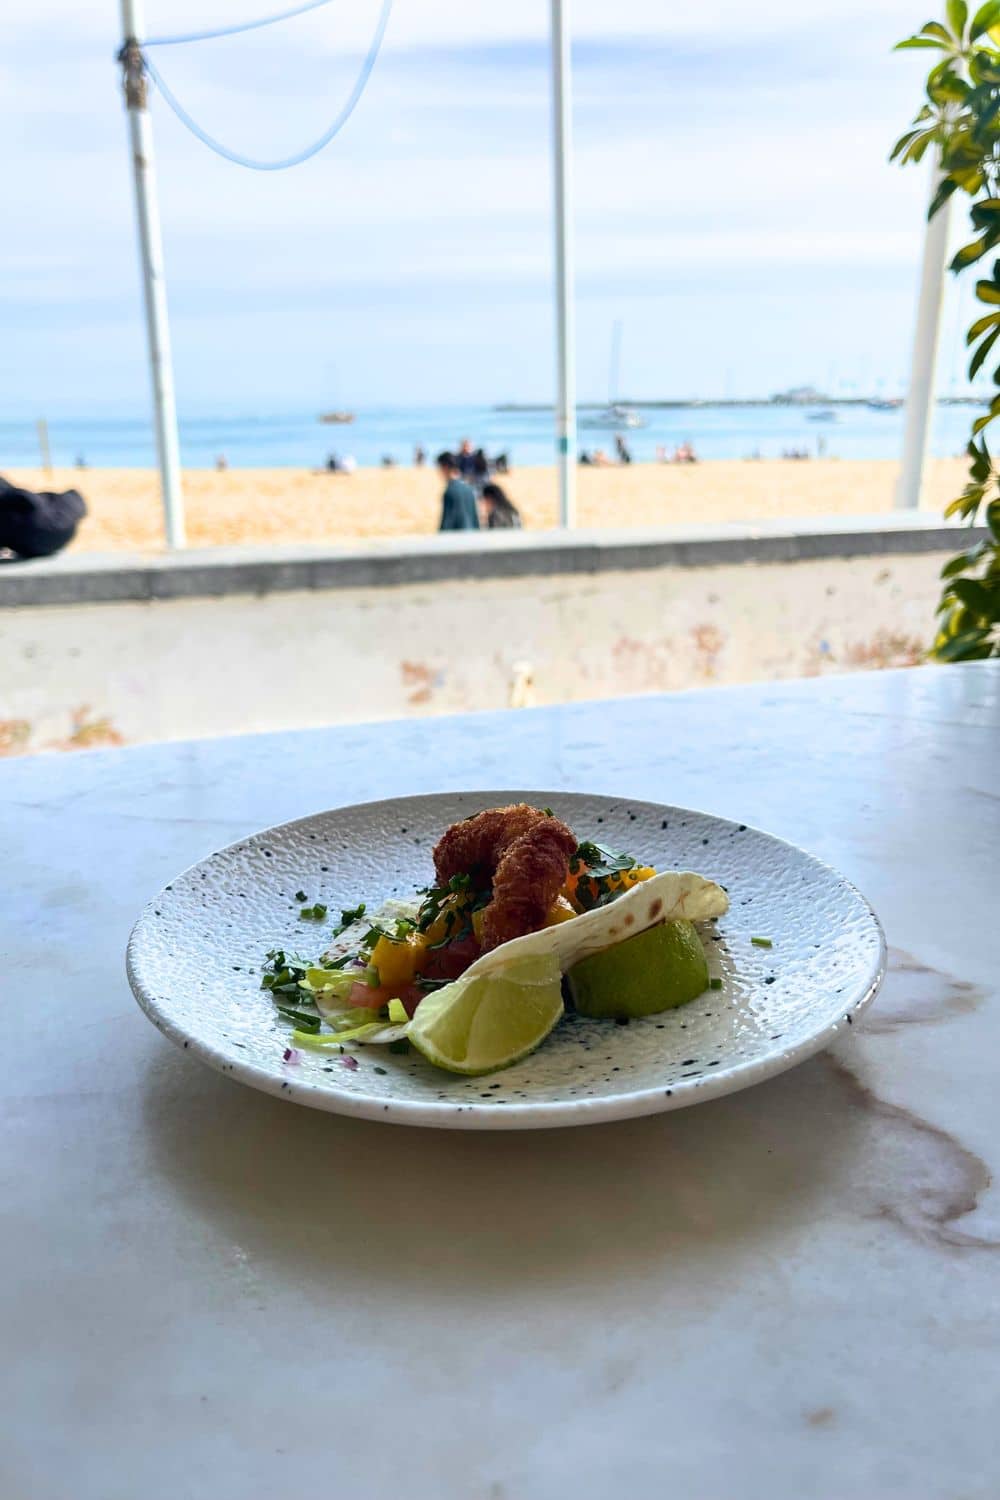 A plate with a breaded shrimp taco garnished with fresh lime on a speckled ceramic plate, set on a marble table with a blurred beach scene in the background, offering a dining experience with a view in Cascais.